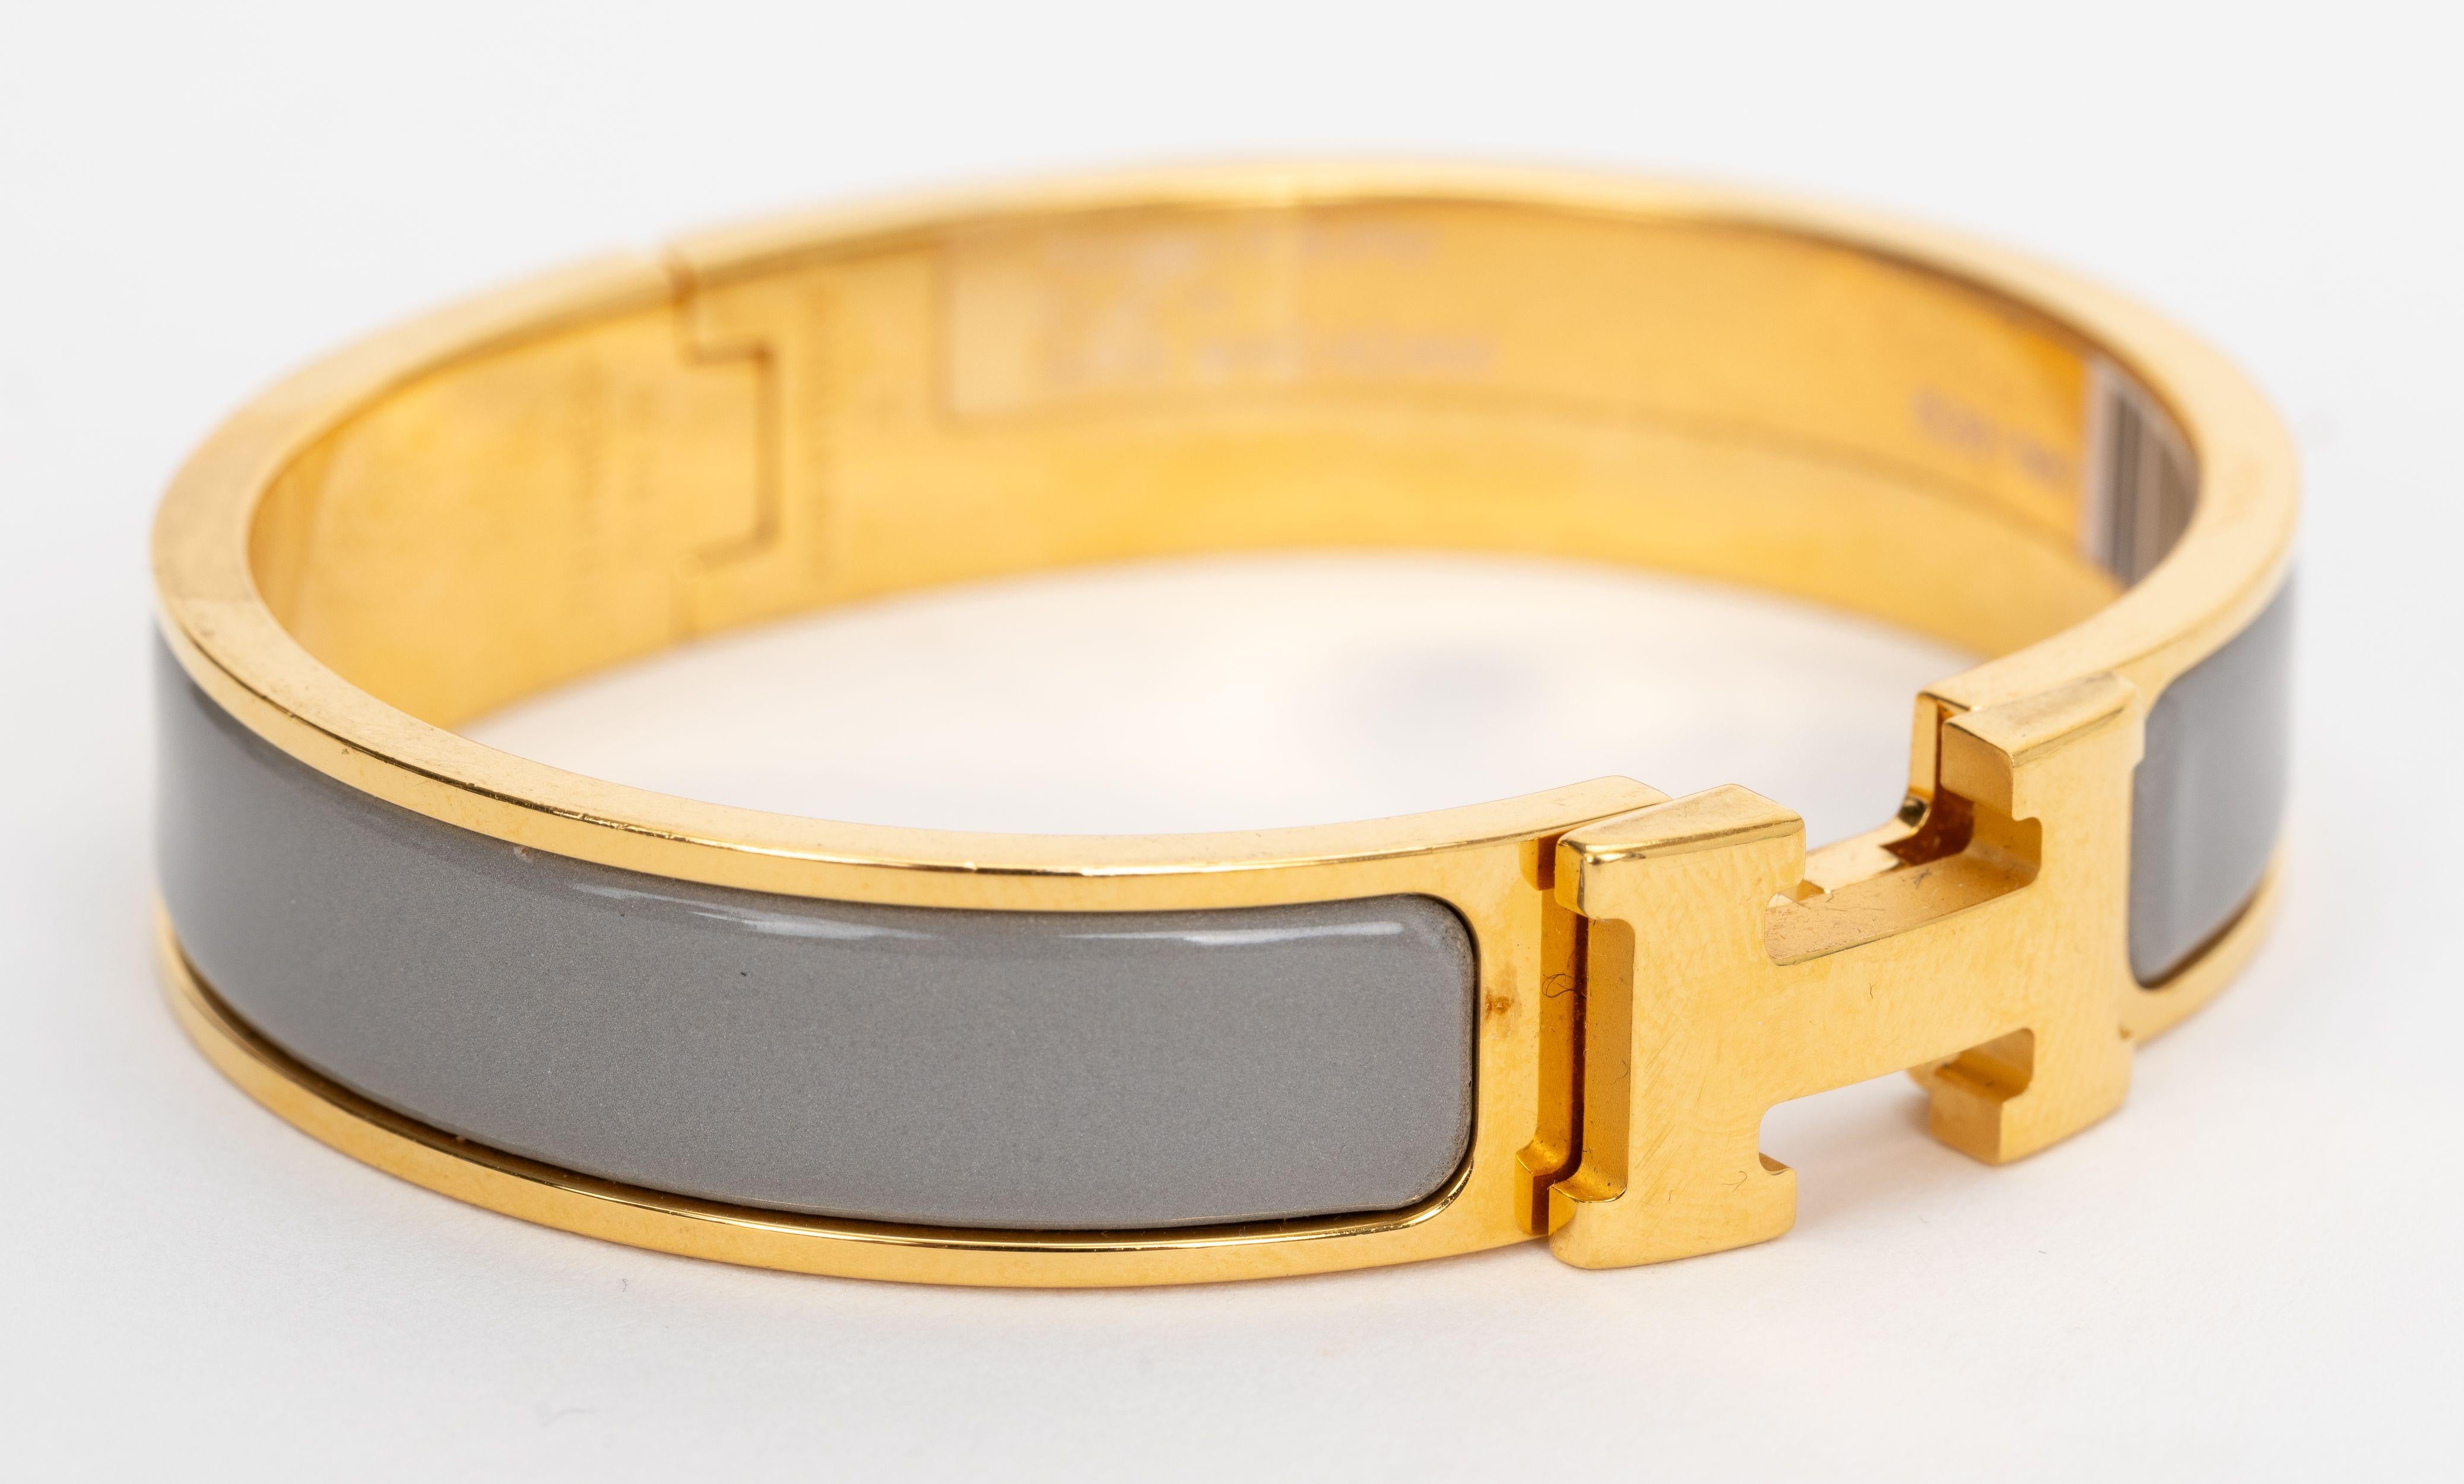 The Hermes Clic clac H, narrow bracelet, in enamel gray macadamia with gold-plated hardware.
Size PM, new in unworn condition, comes with velvet pouch.